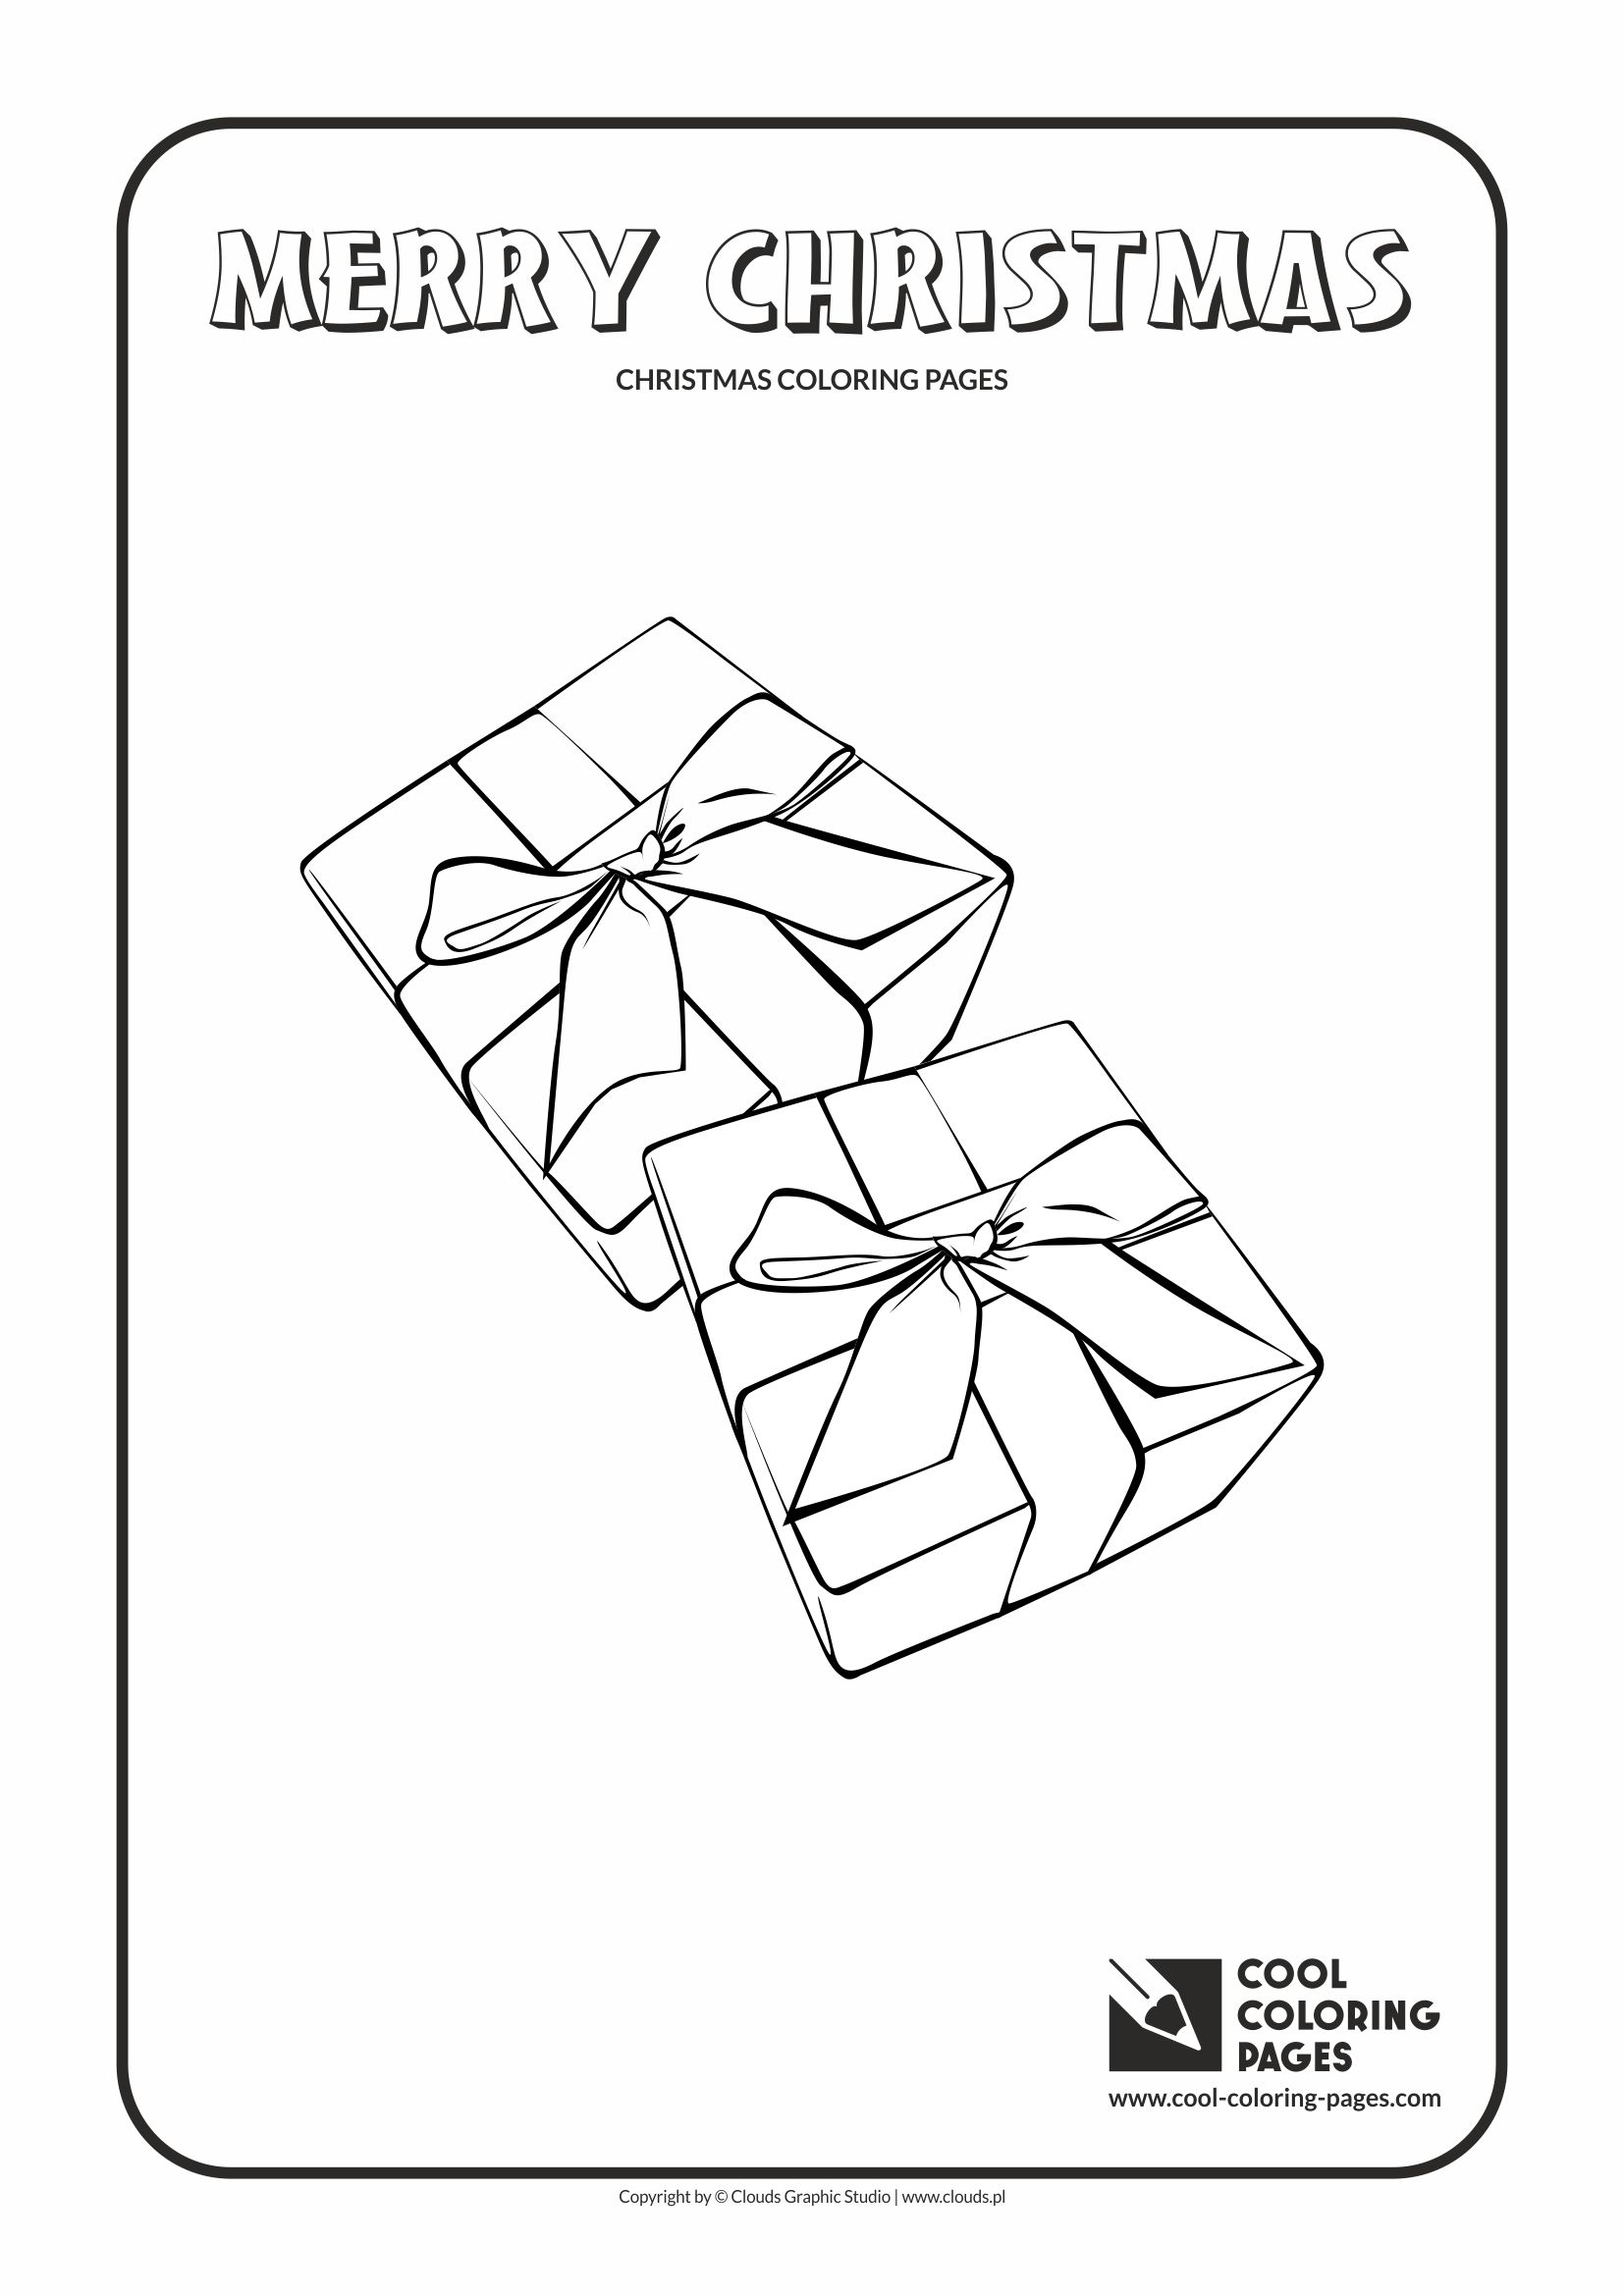 Cool Coloring Pages - Holidays / Christmas gifts / Coloring page with Christmas gifts